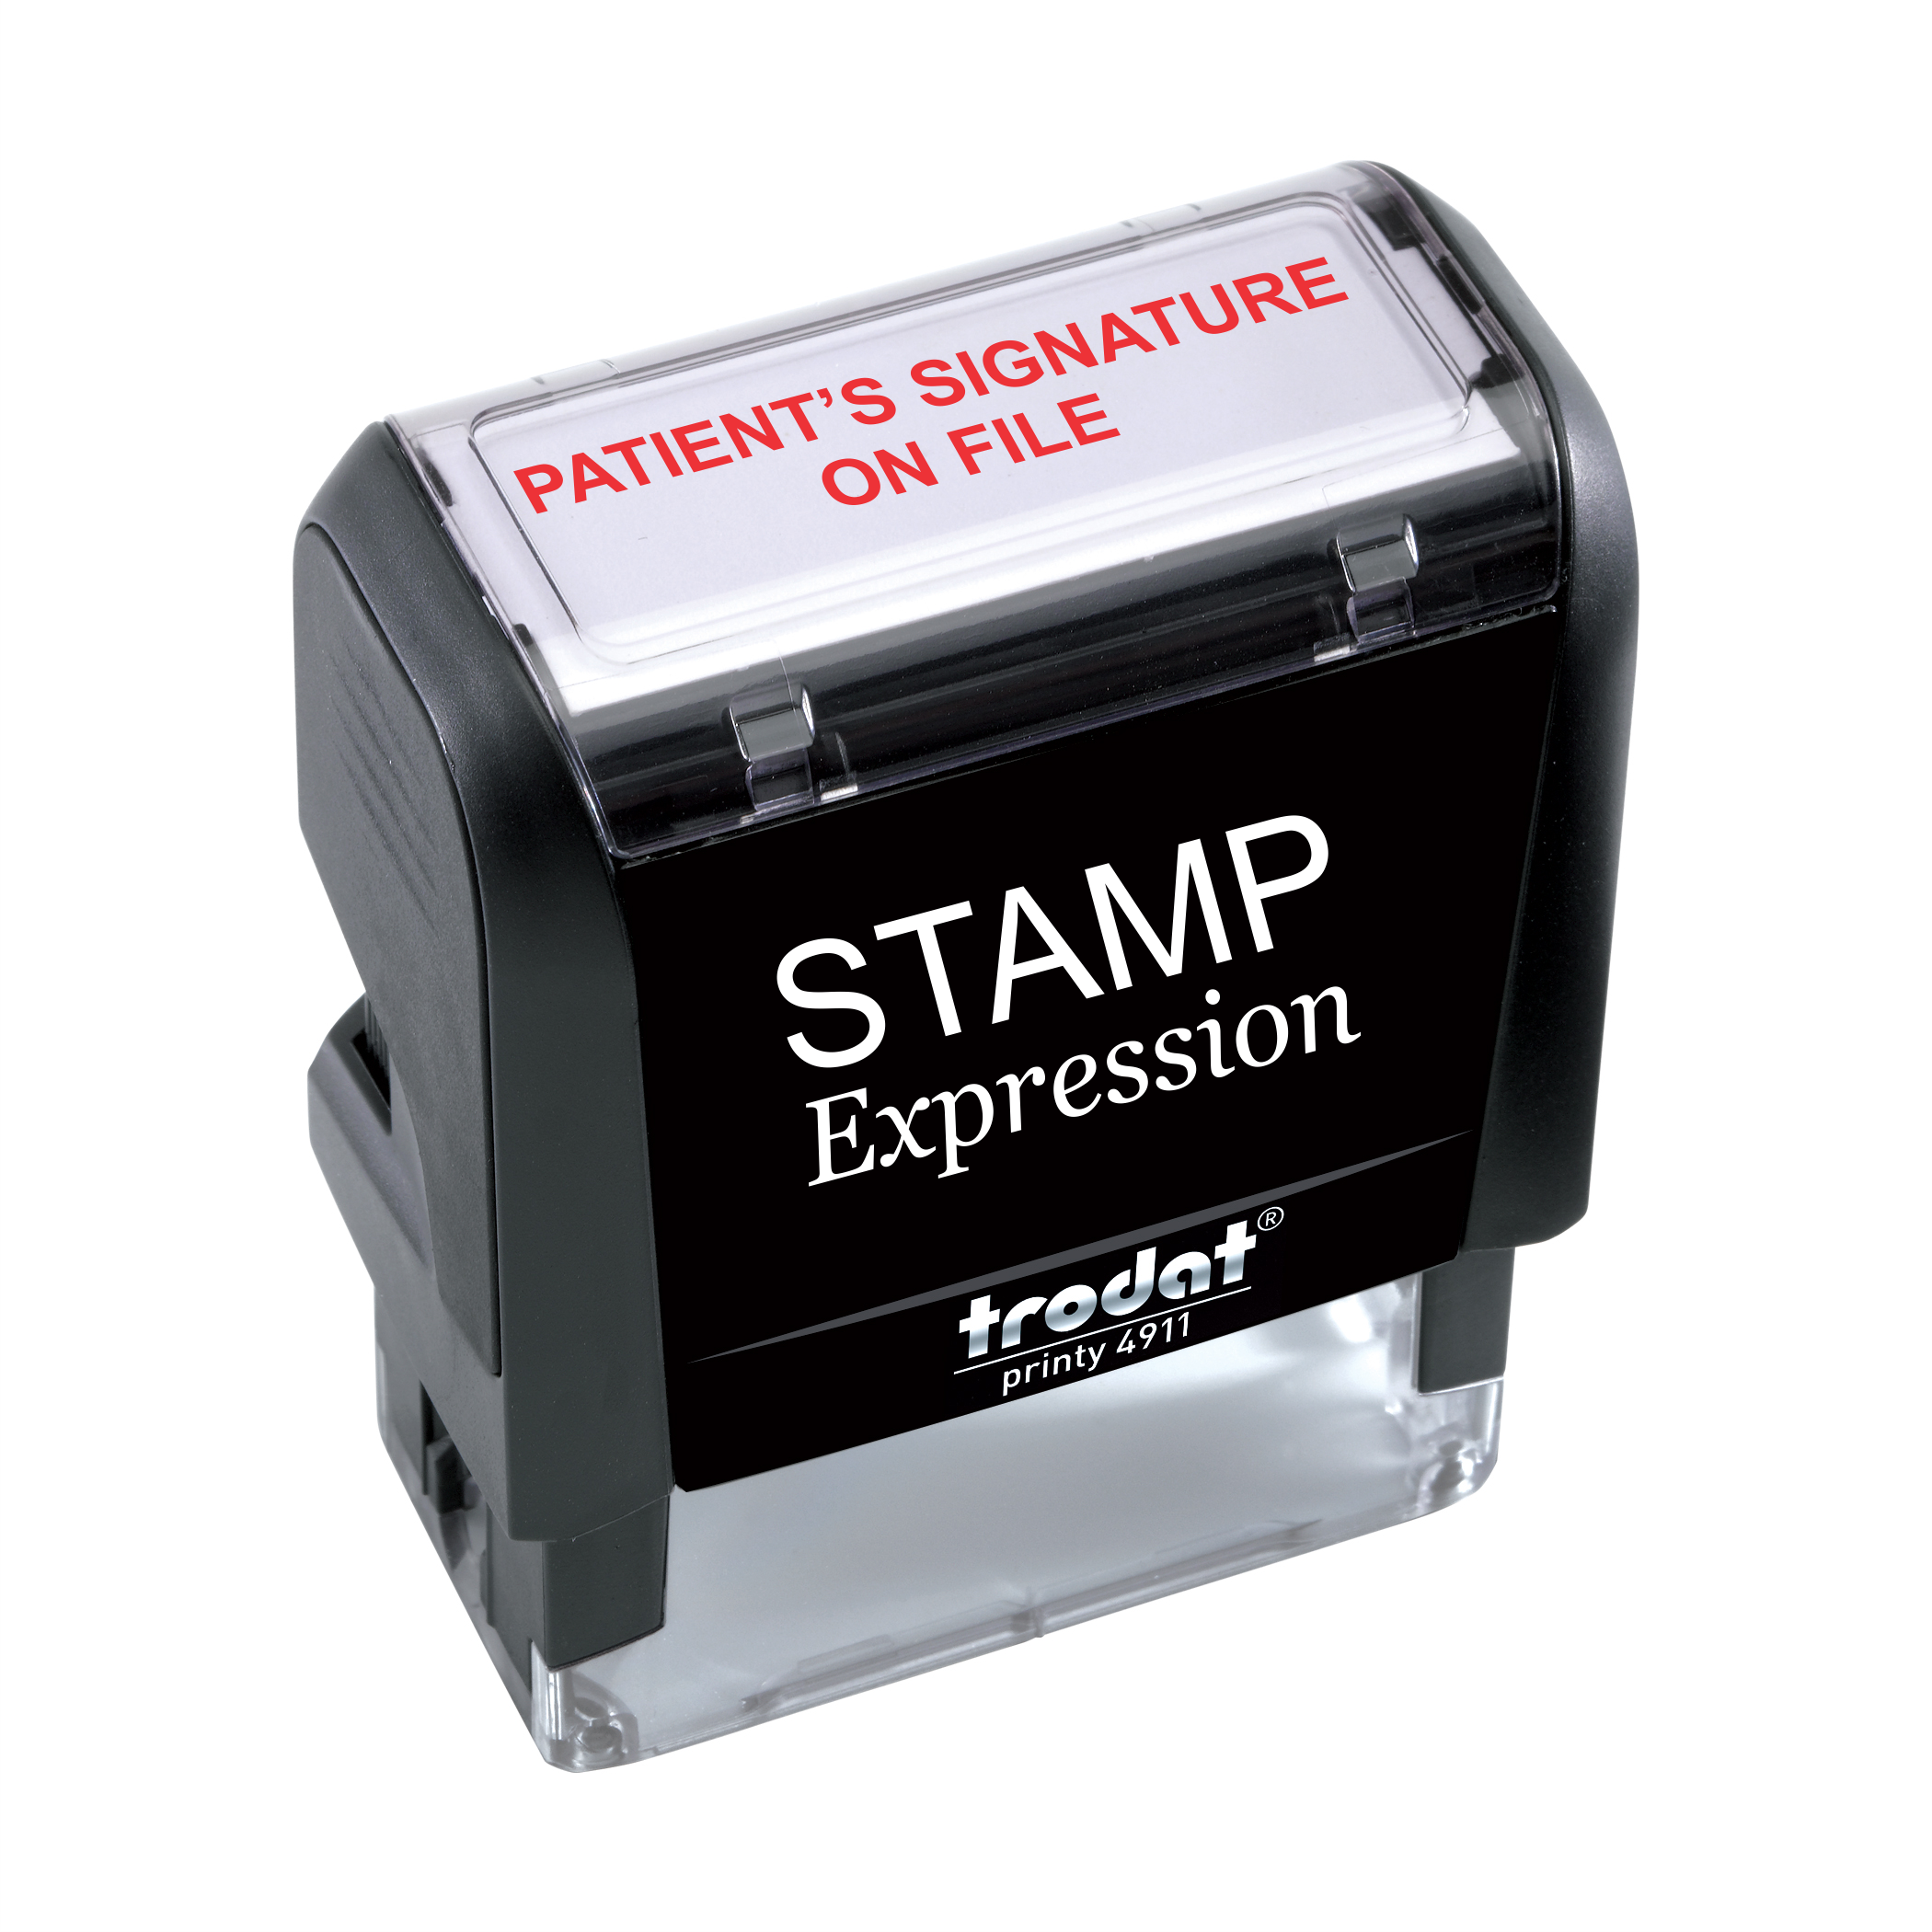 Patient's Signature On File Medical Self Inking Rubber Stamp